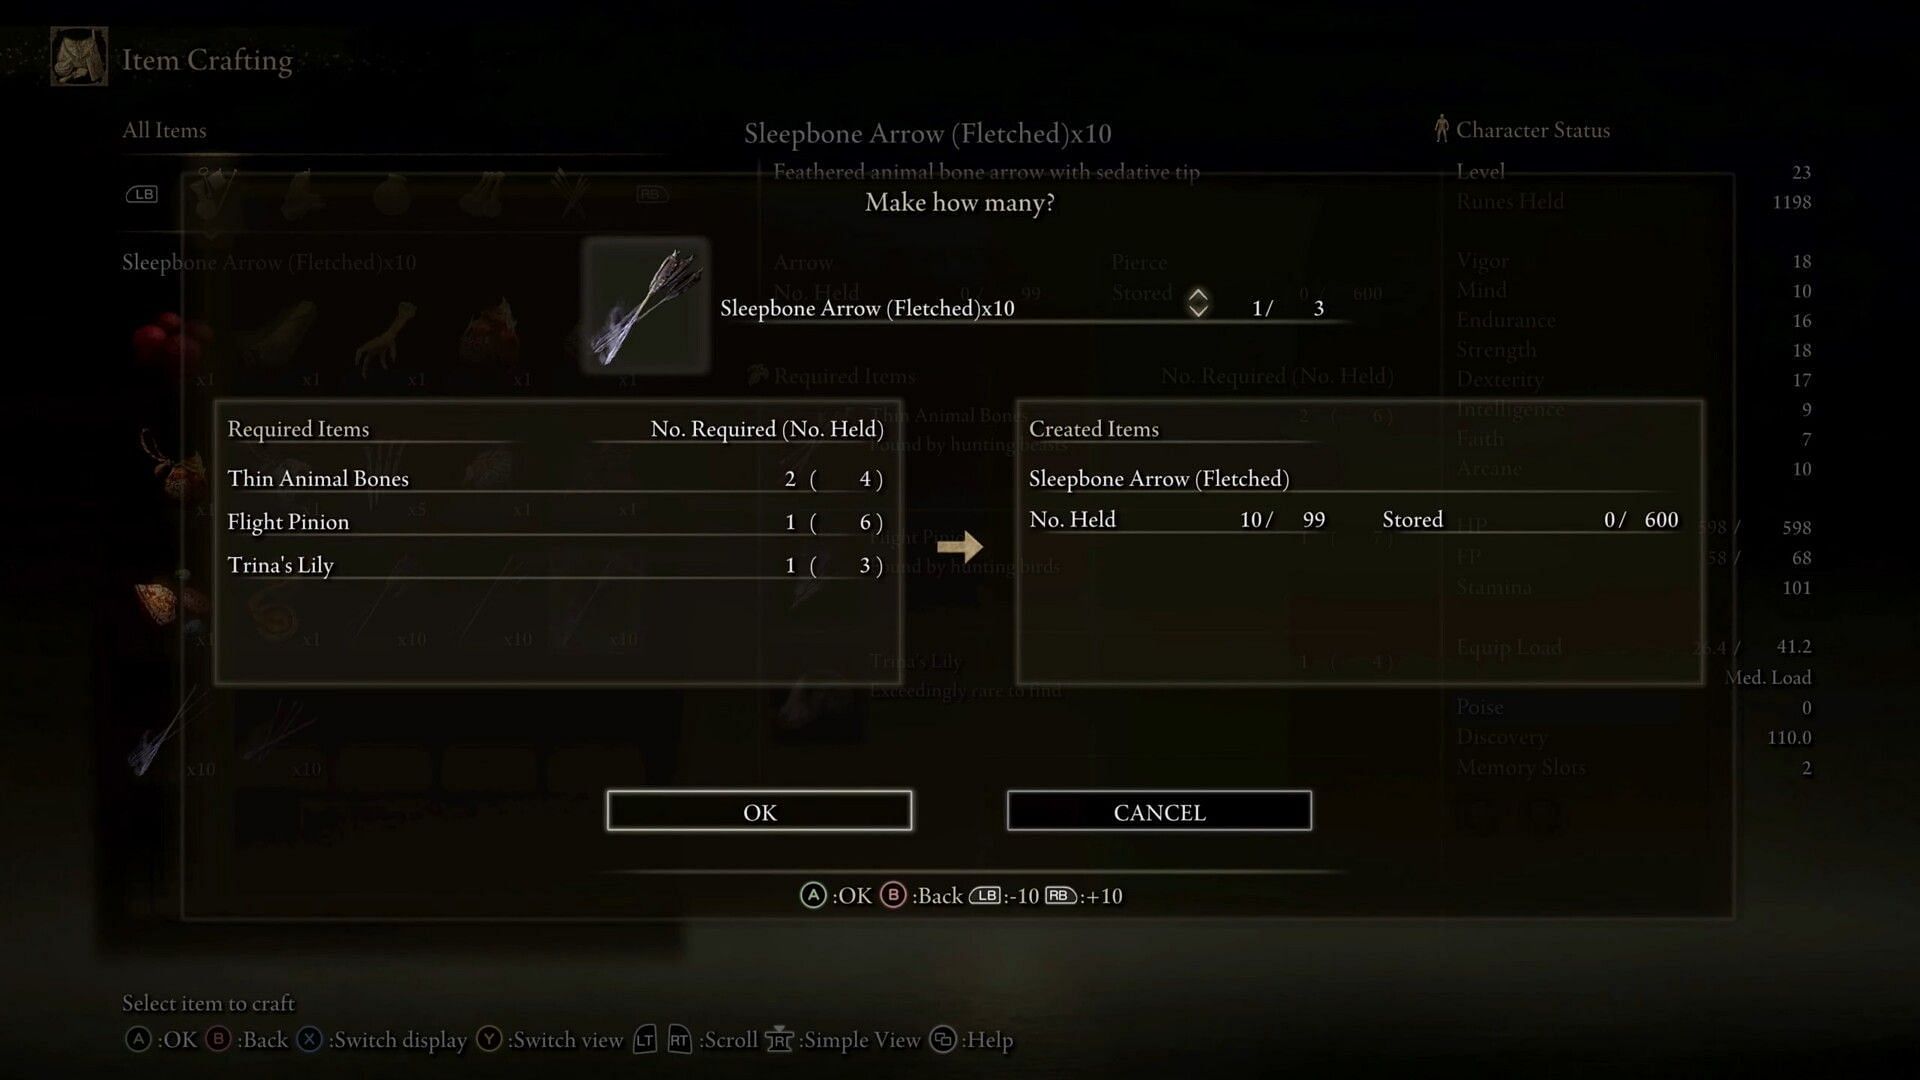 Sleepbone Arrows can be crafted after the Cookbook is purchased (Image via FromSoftware Inc.)